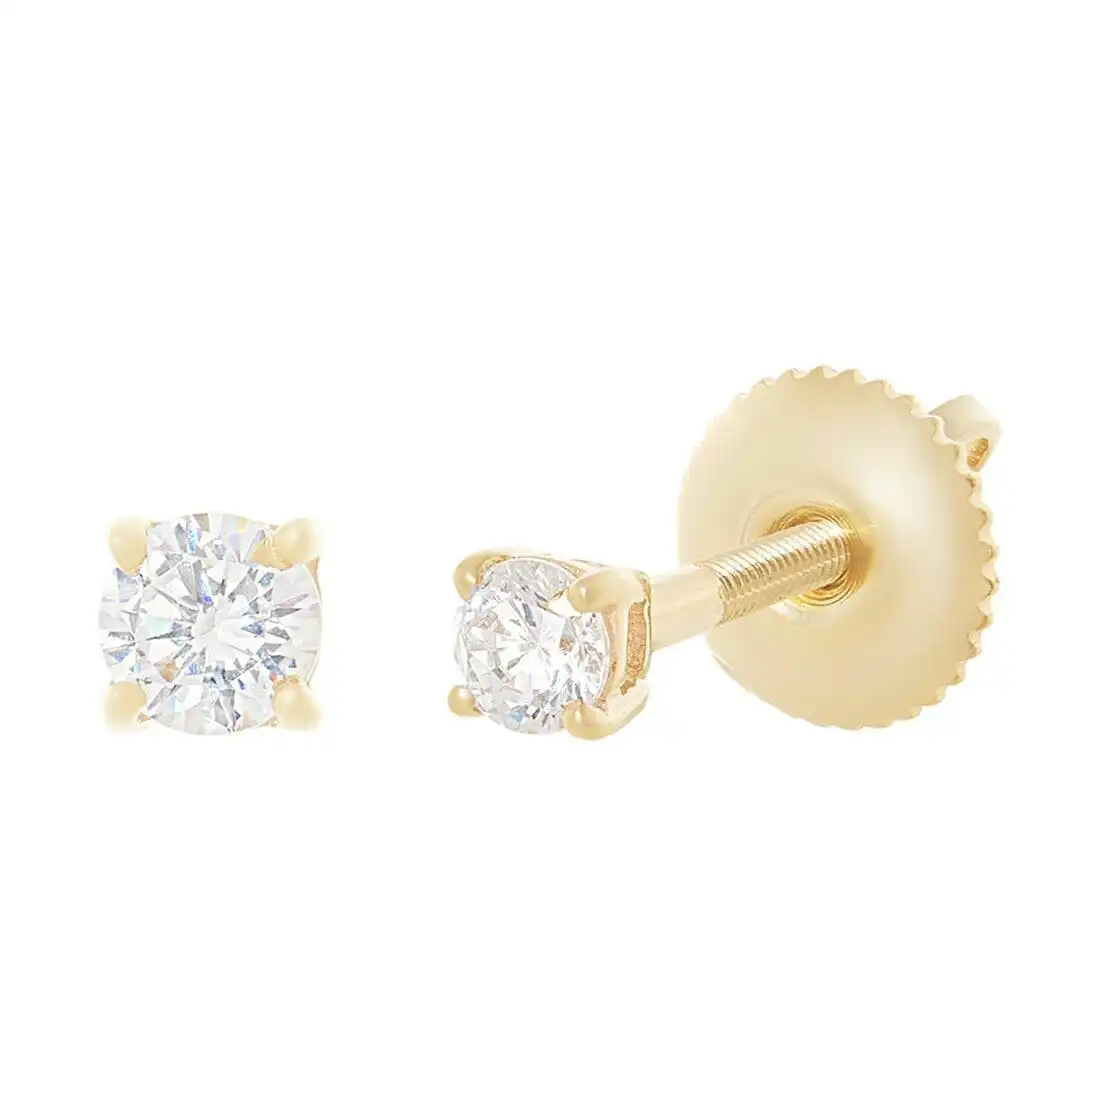 9ct Yellow Gold 4mm Stud Earring with Cubic Zirconia